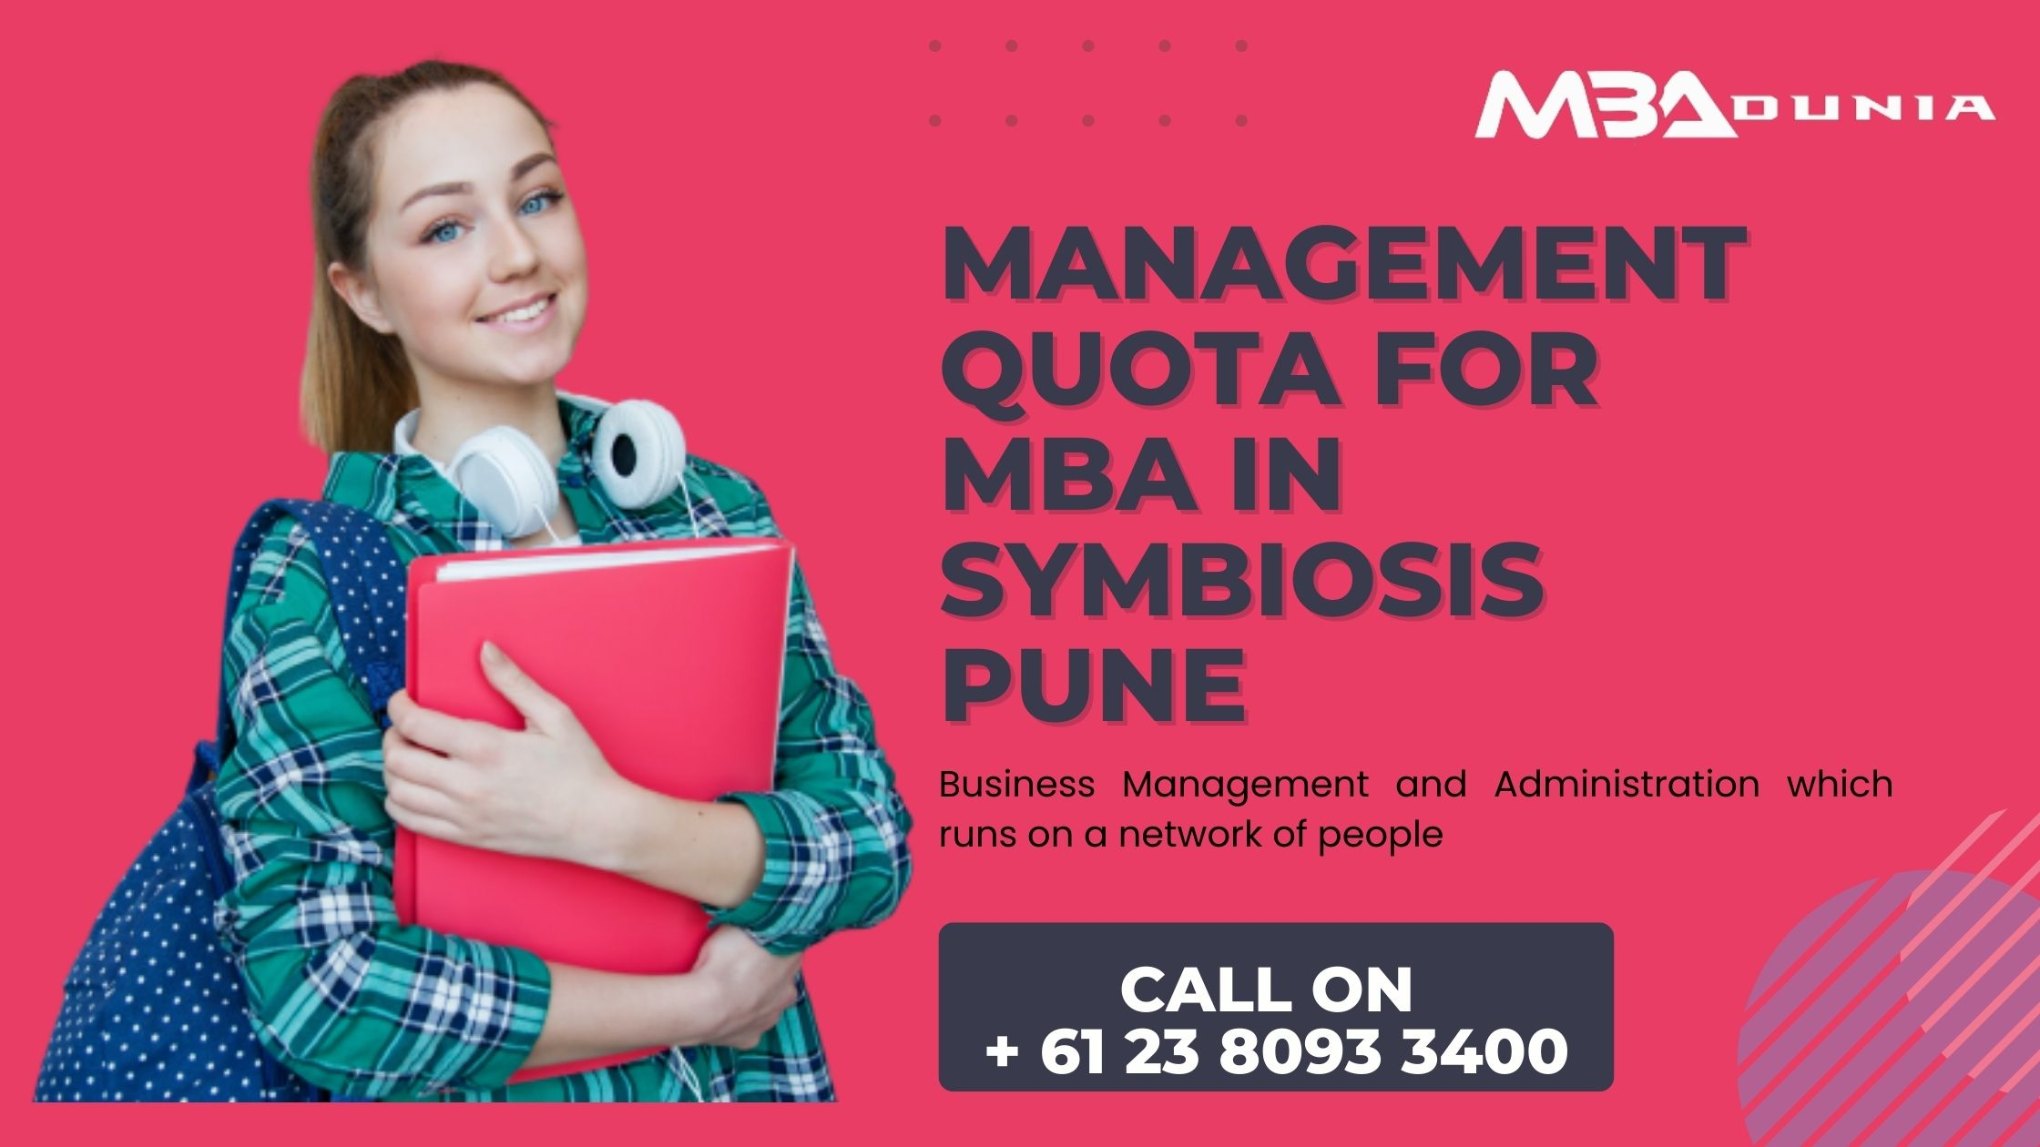 Get Management Quota For MBA In Symbiosis Pune